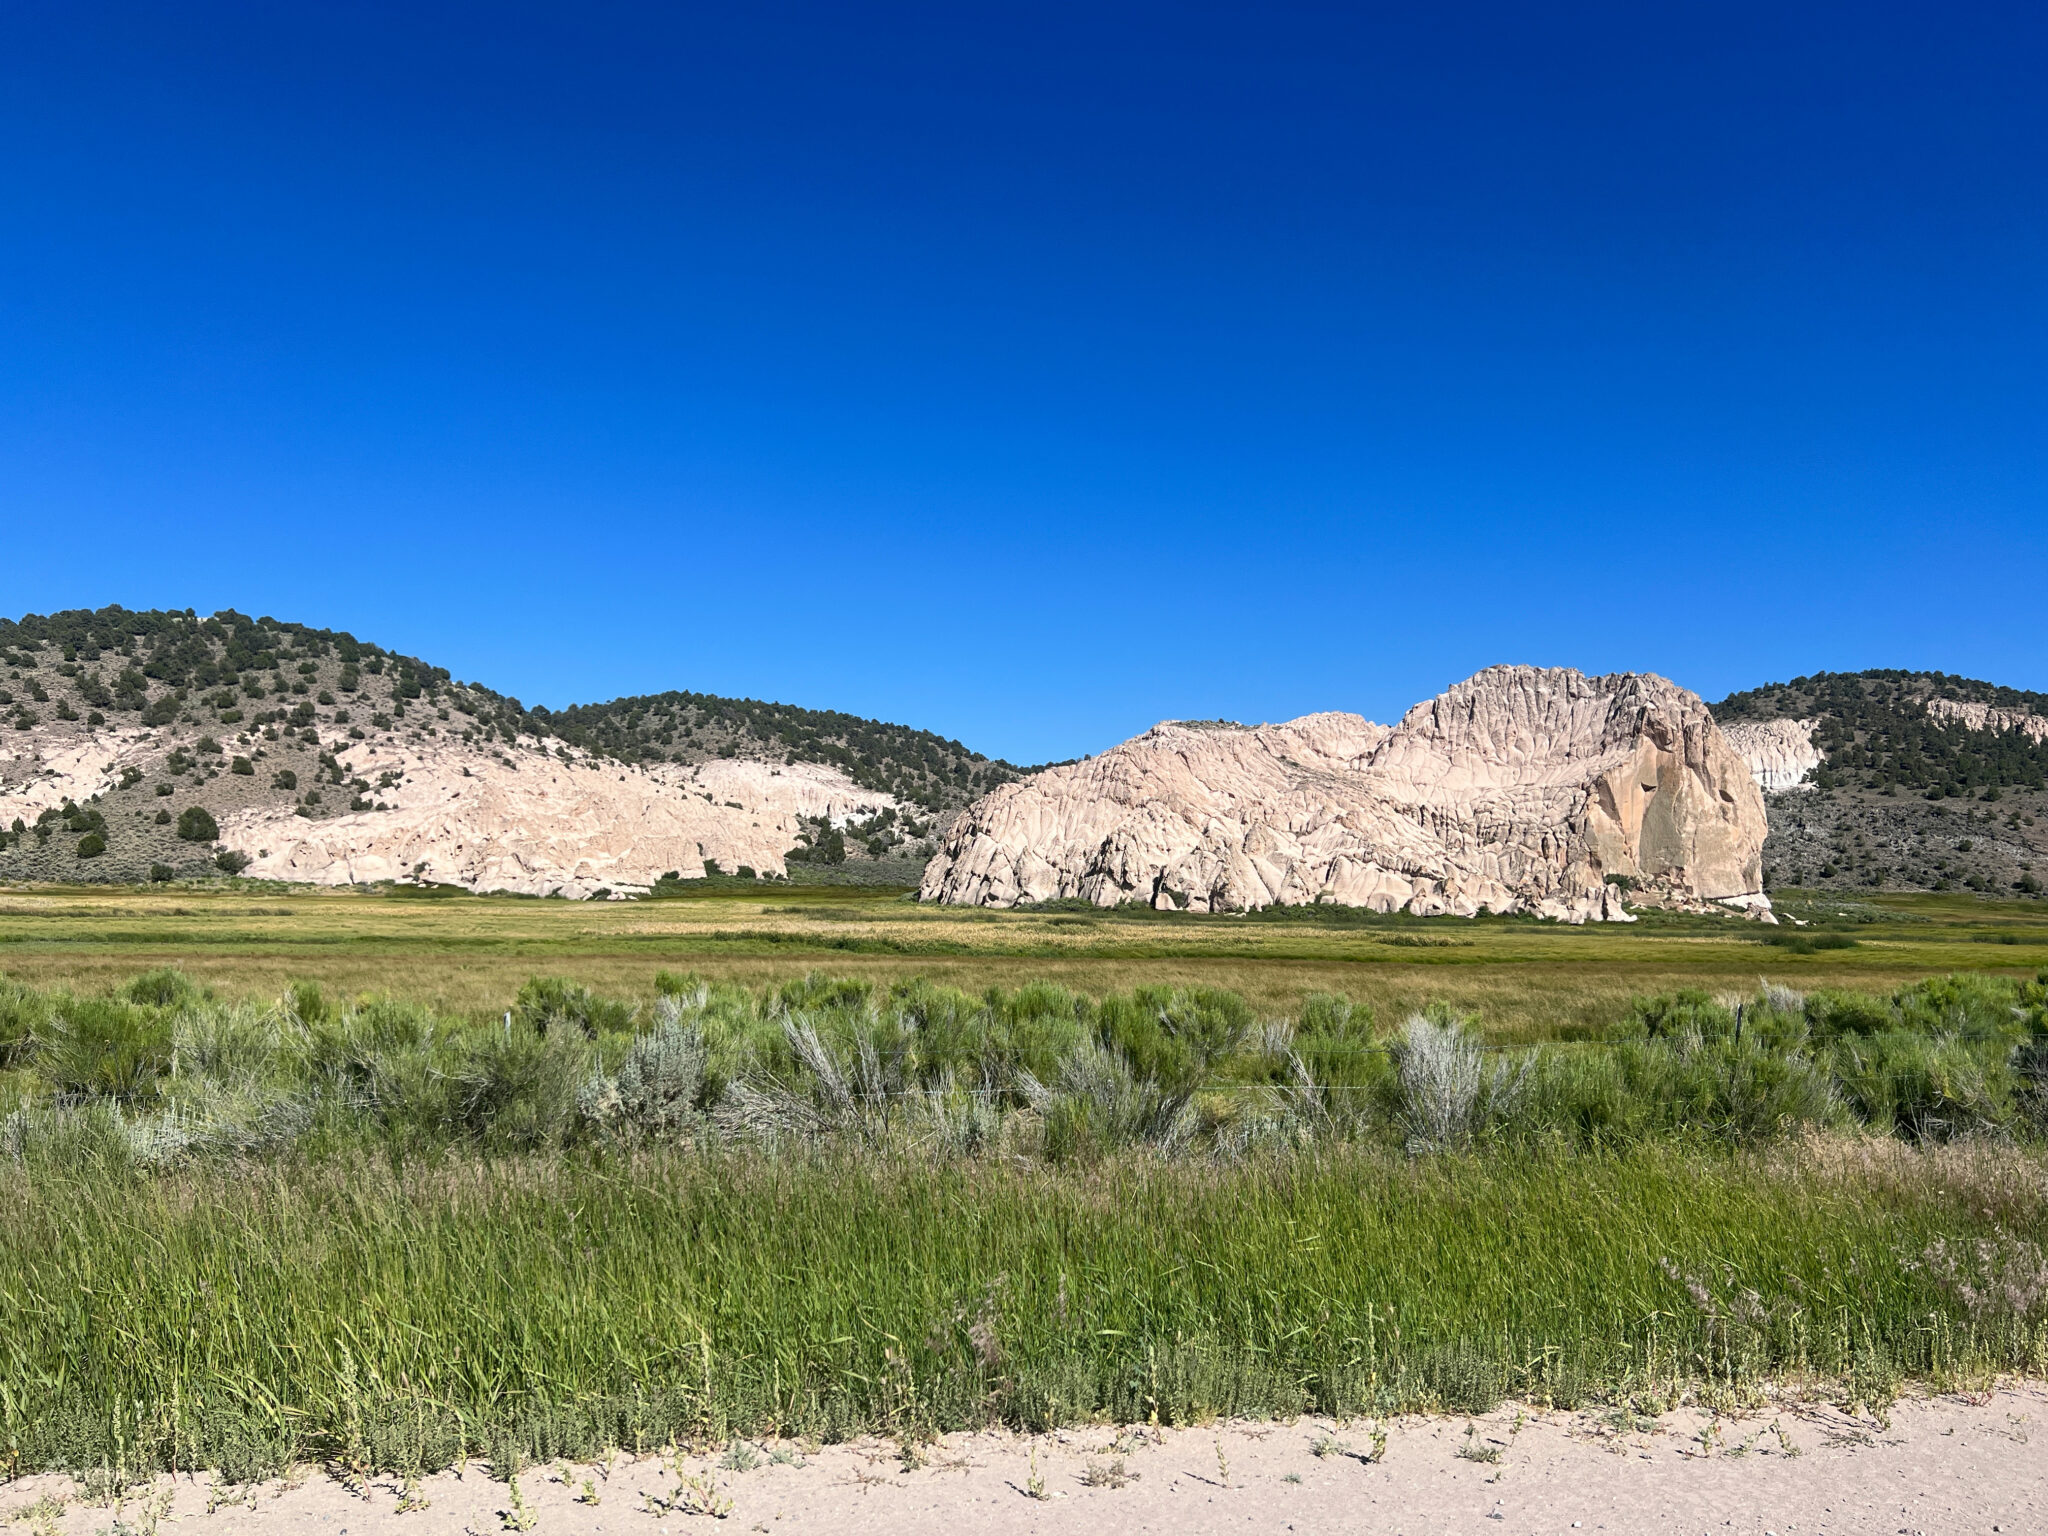 A green meadow with dry rocky bluffs and blue sky in the background.